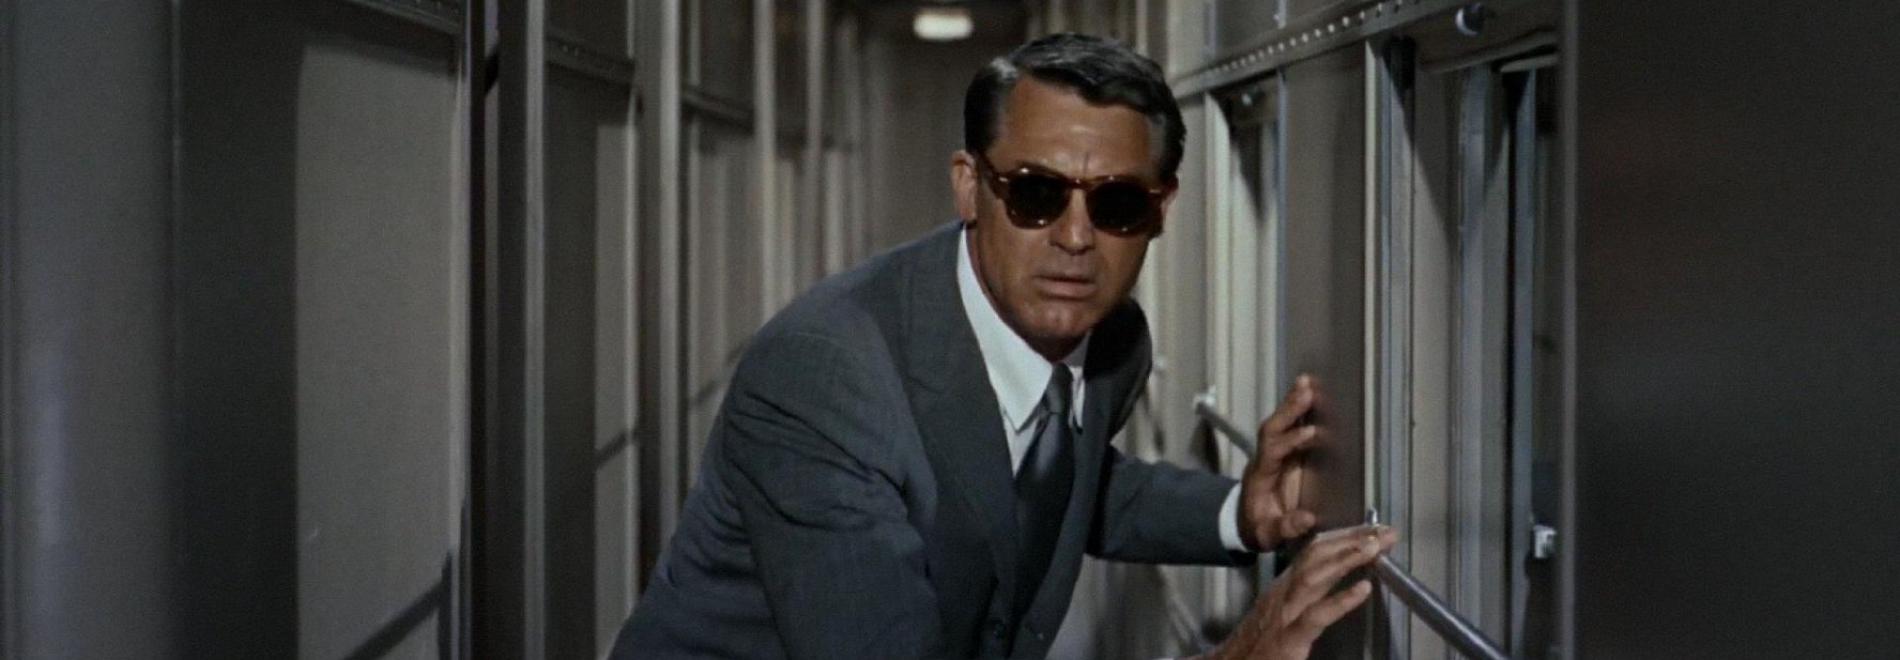 North by Northwest (Alfred Hitchcock, 1959)